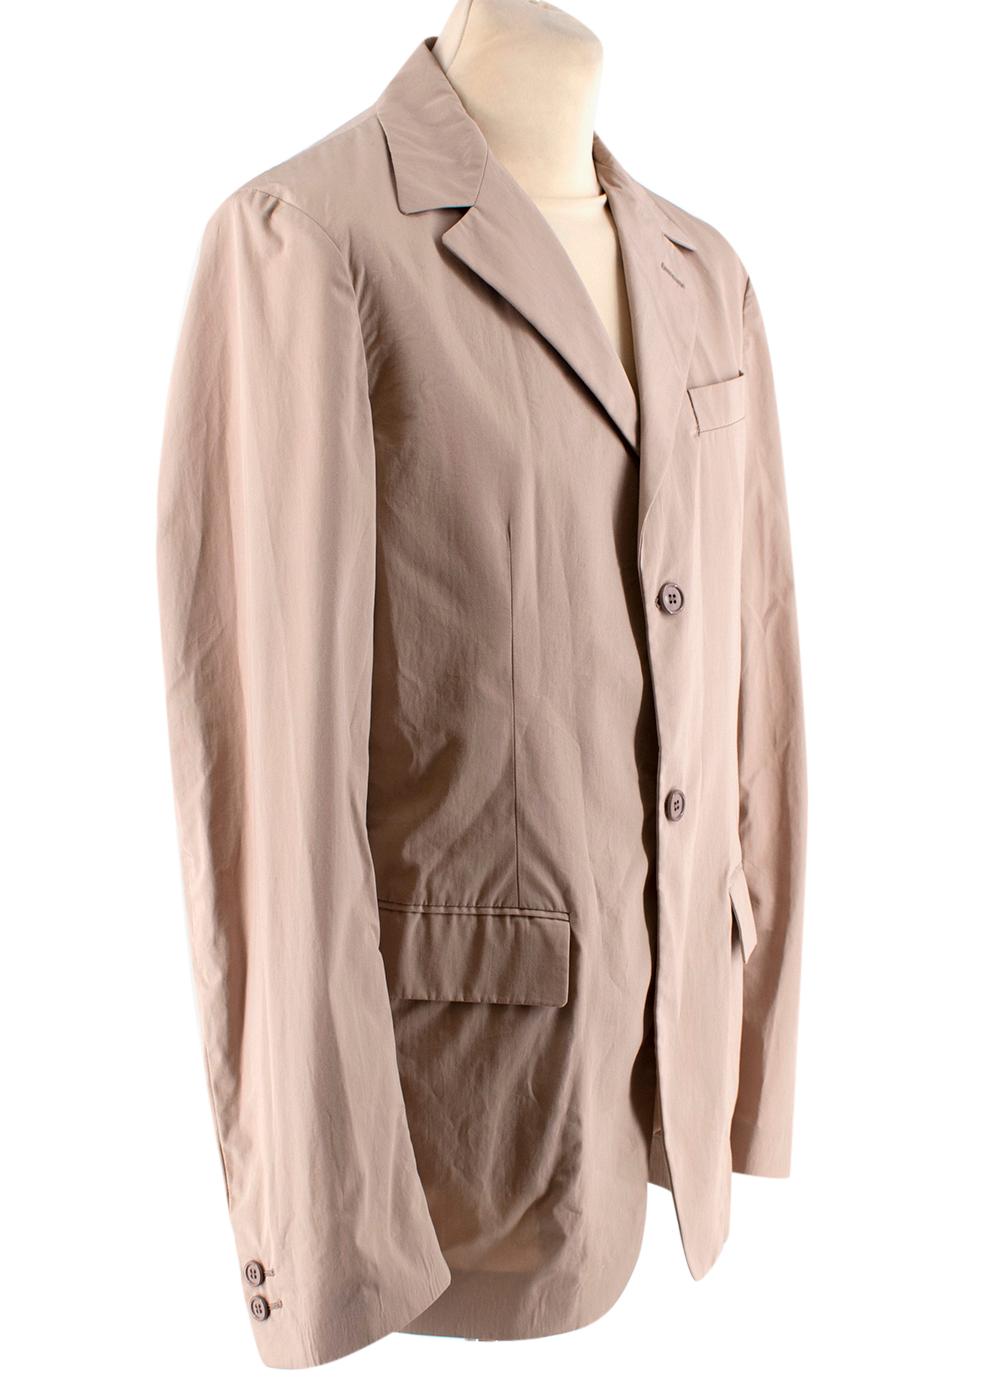 Meu Miu Beige Cotton Single Breasted Blazer Jacket

-Made of soft lightweight cotton 
-Classic single breasted cut 
-Gorgeous beige hue 
-3 pockets to the front 
-Buttoned cuffs 
-Interior pocket 
-Button fastening to the front 
-Timeless elegant